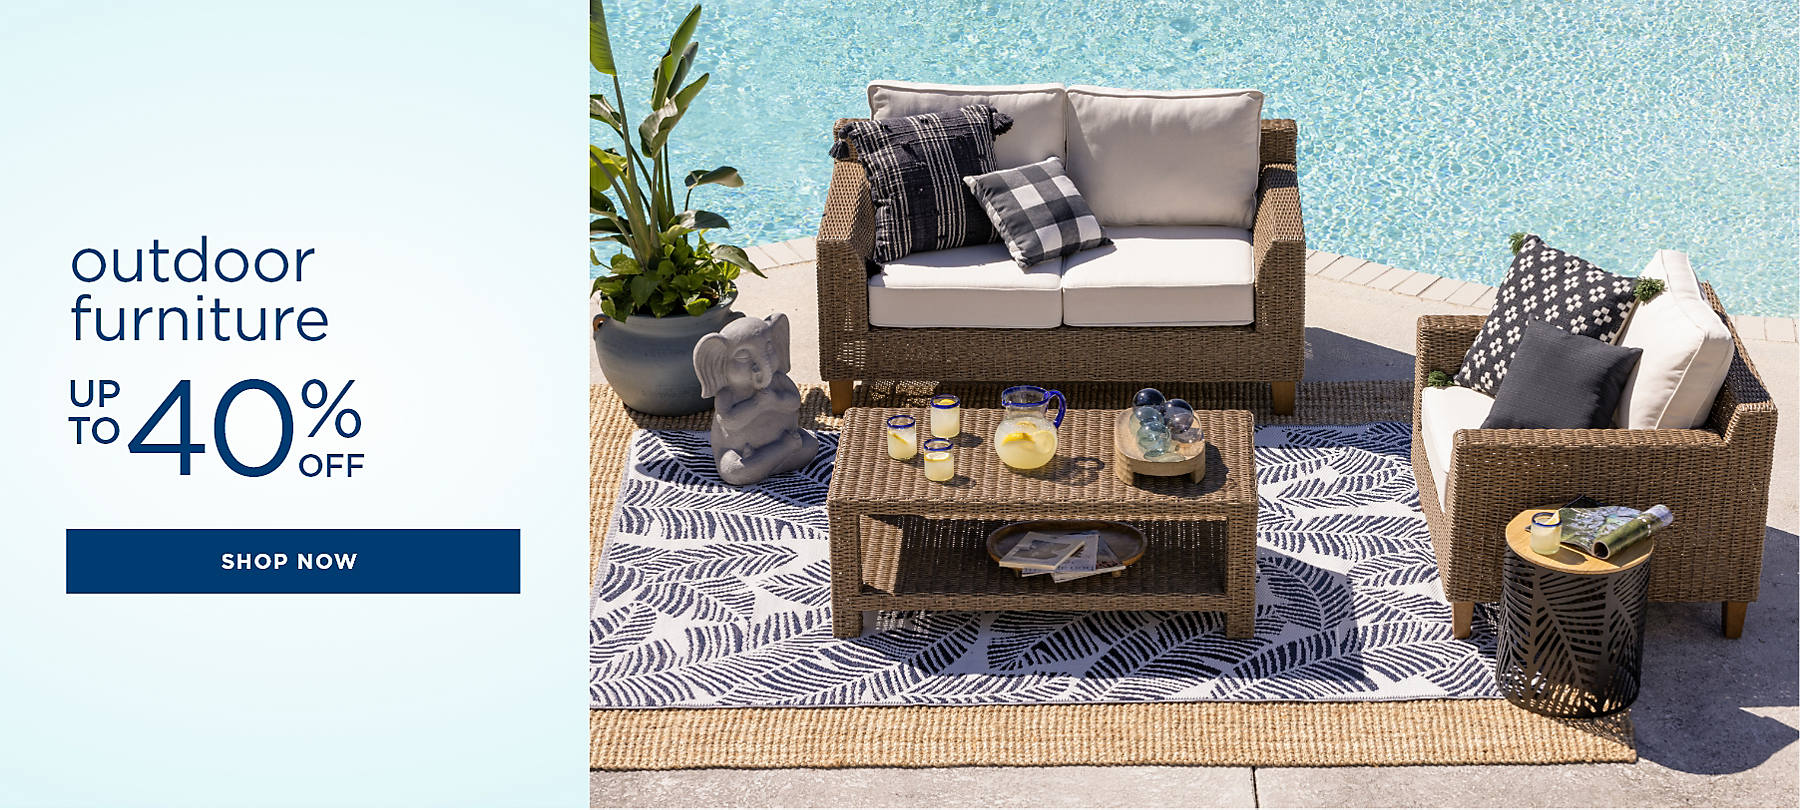 outdoor furniture up to 40% off shop now